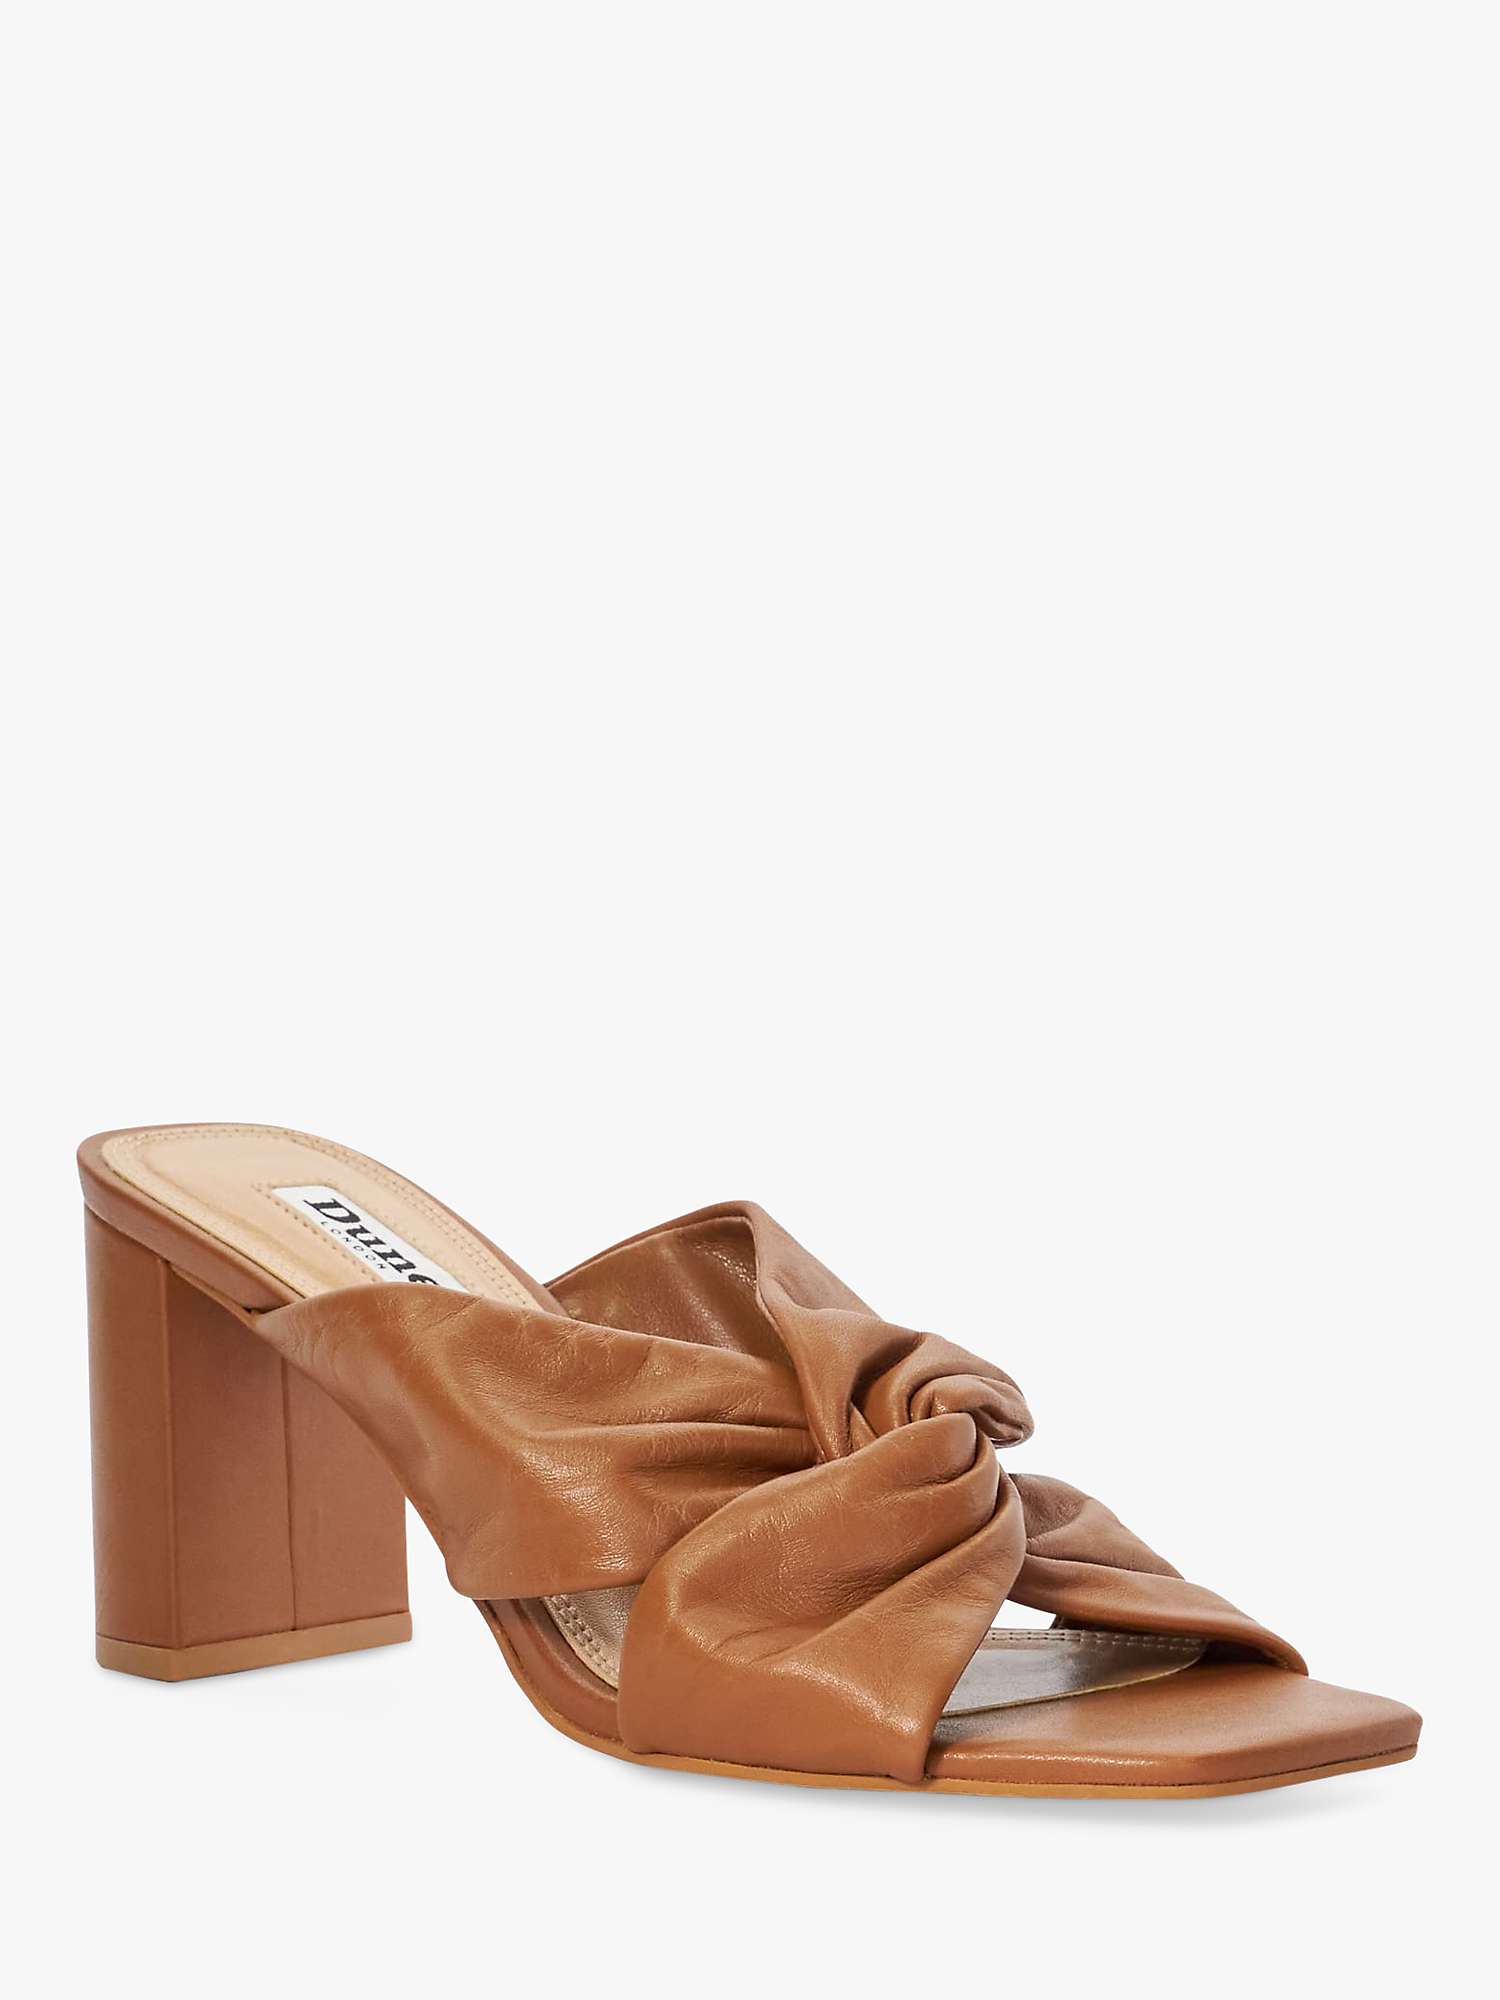 Buy Dune Maizing Soft Leather Twist Mules, Tan Online at johnlewis.com